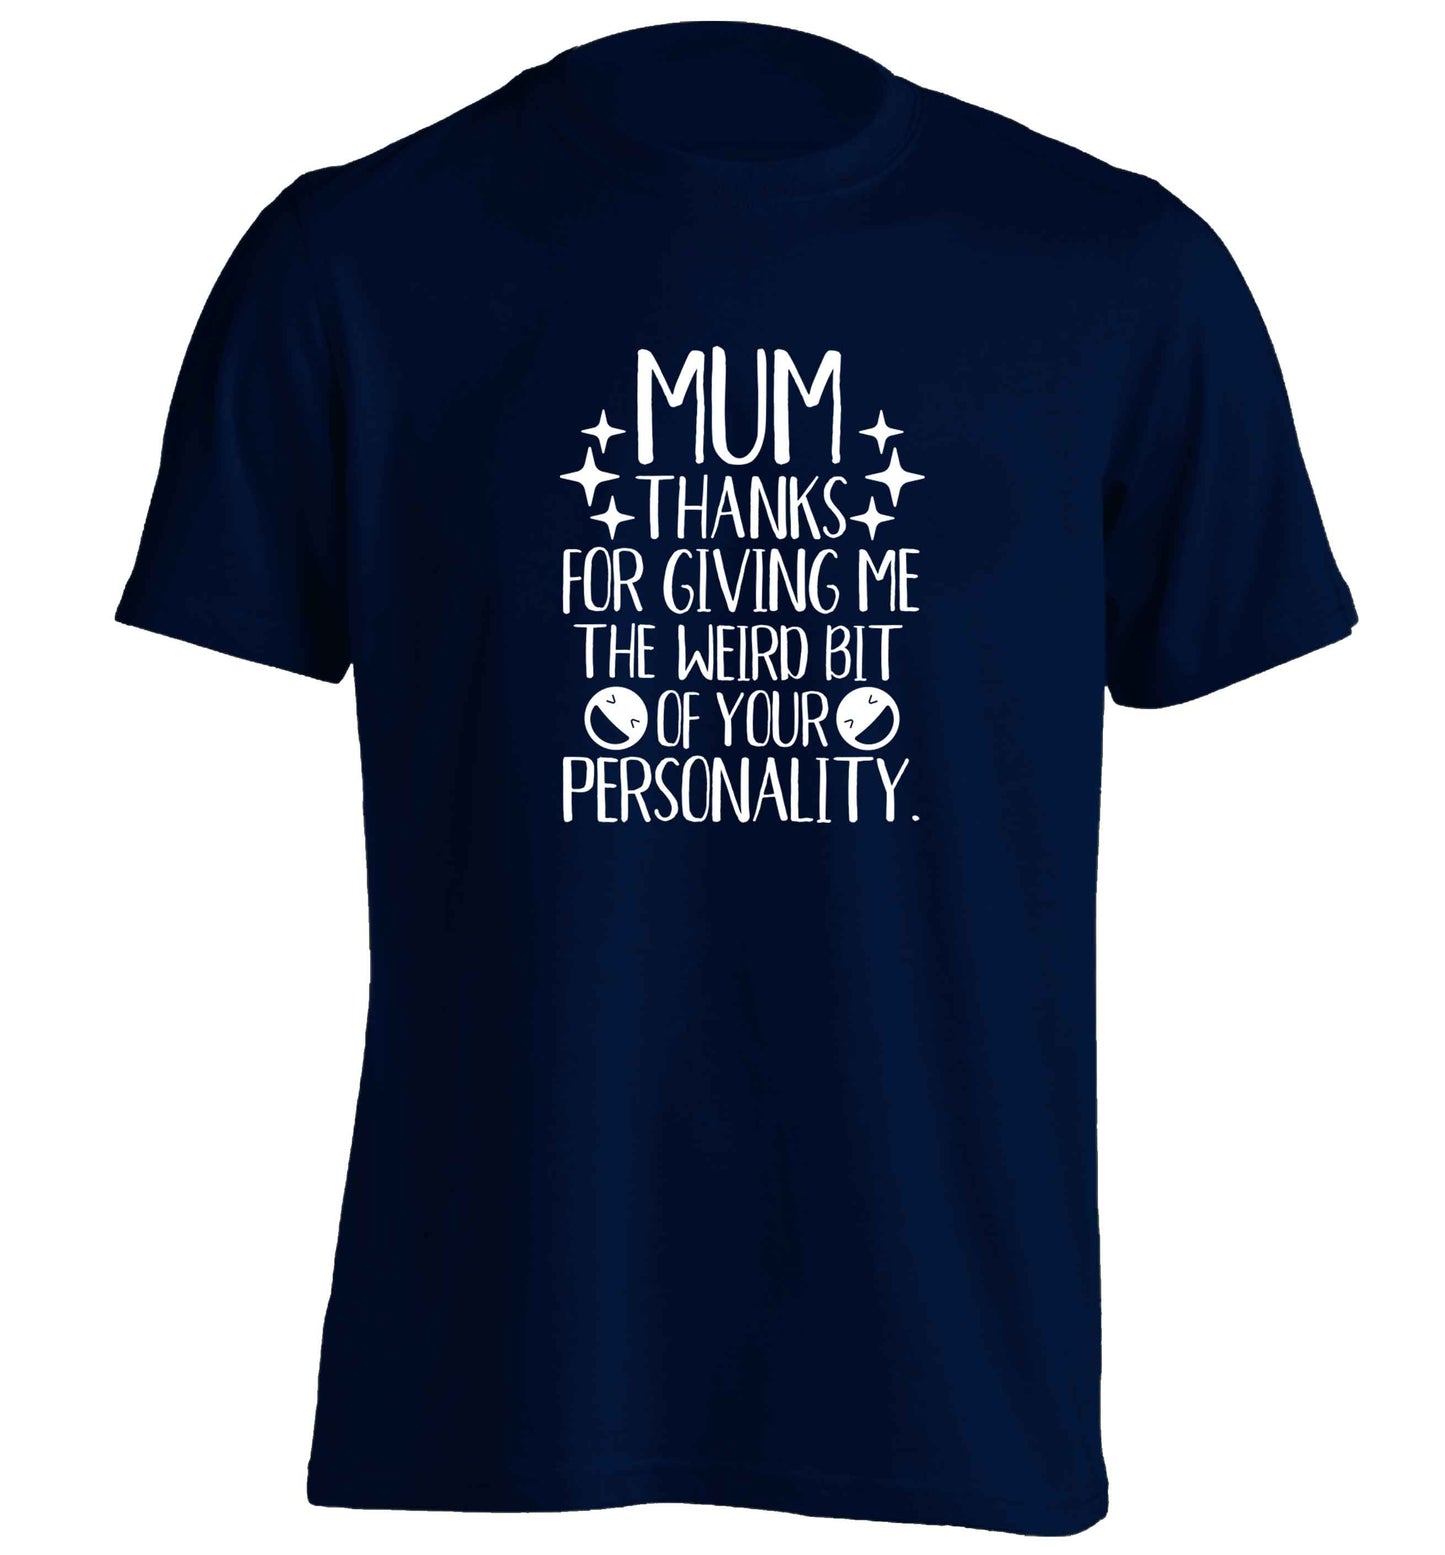 Mum, I love you more than halloumi and if you know me at all you know how deep that is adults unisex navy Tshirt 2XL